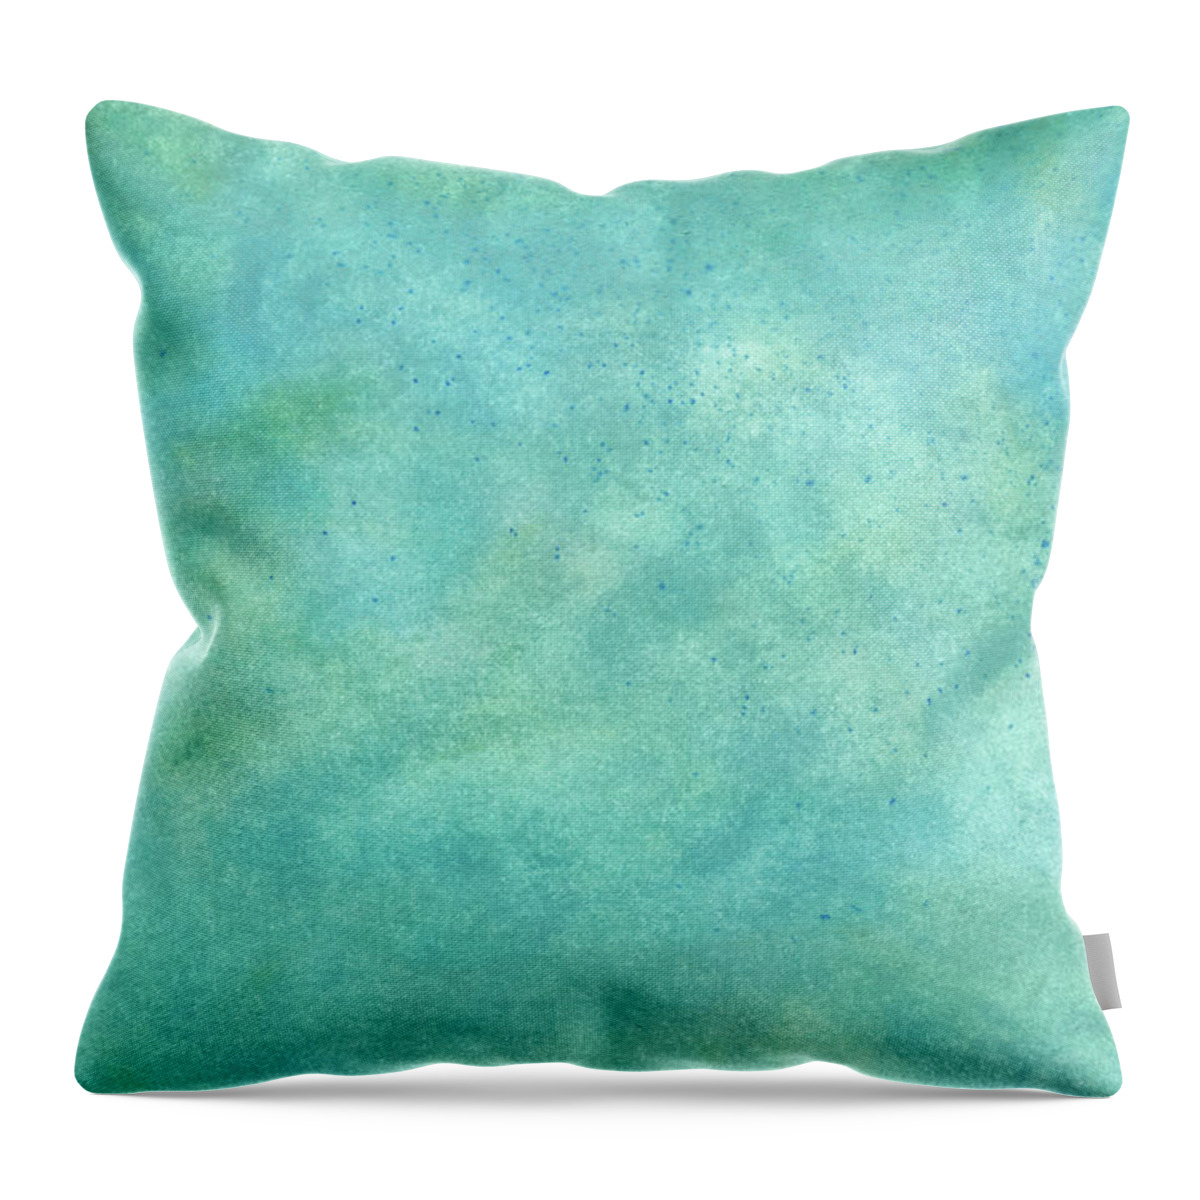 Art Throw Pillow featuring the photograph Textured Background Hand Painted With by Andipantz